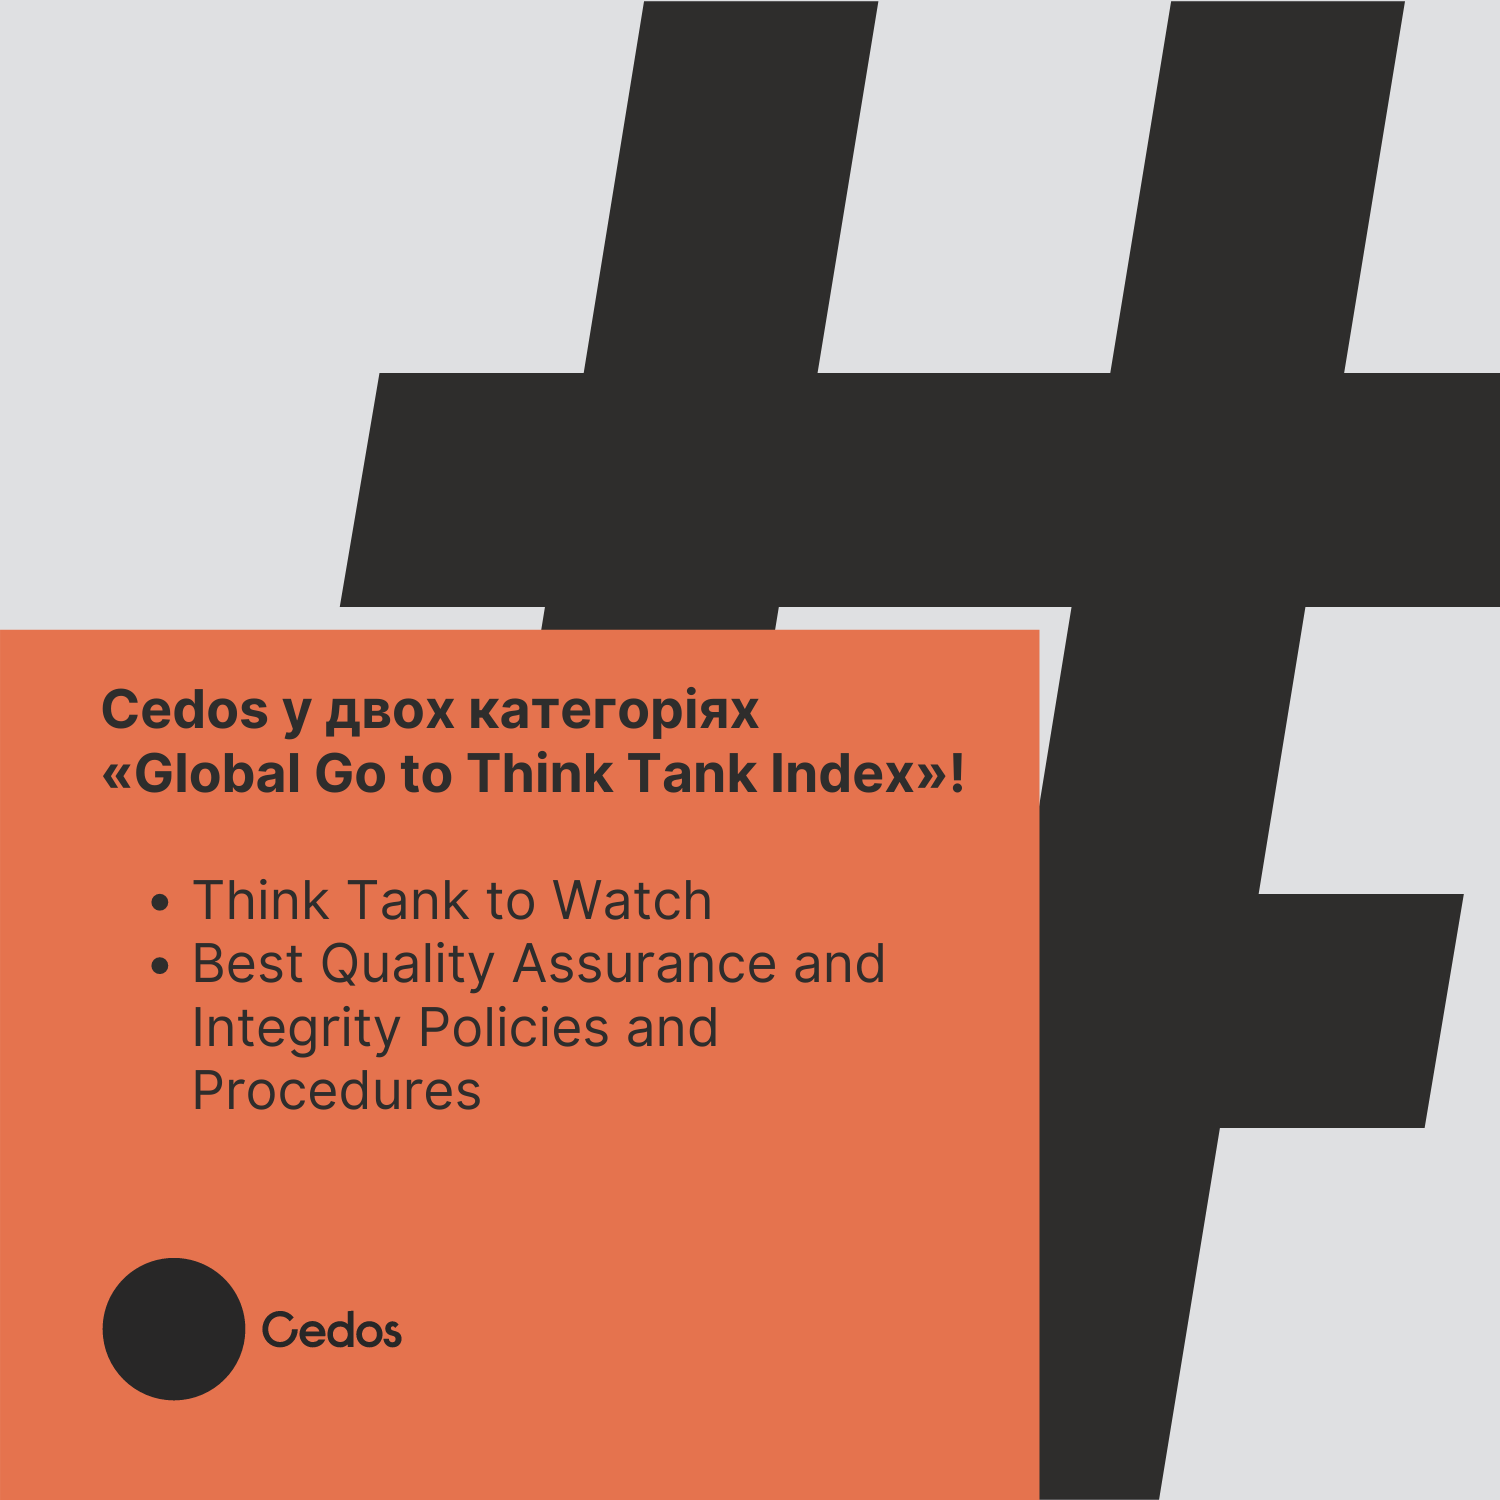 Cedos in two categories of Global Go to Think Tank Index! Cedos